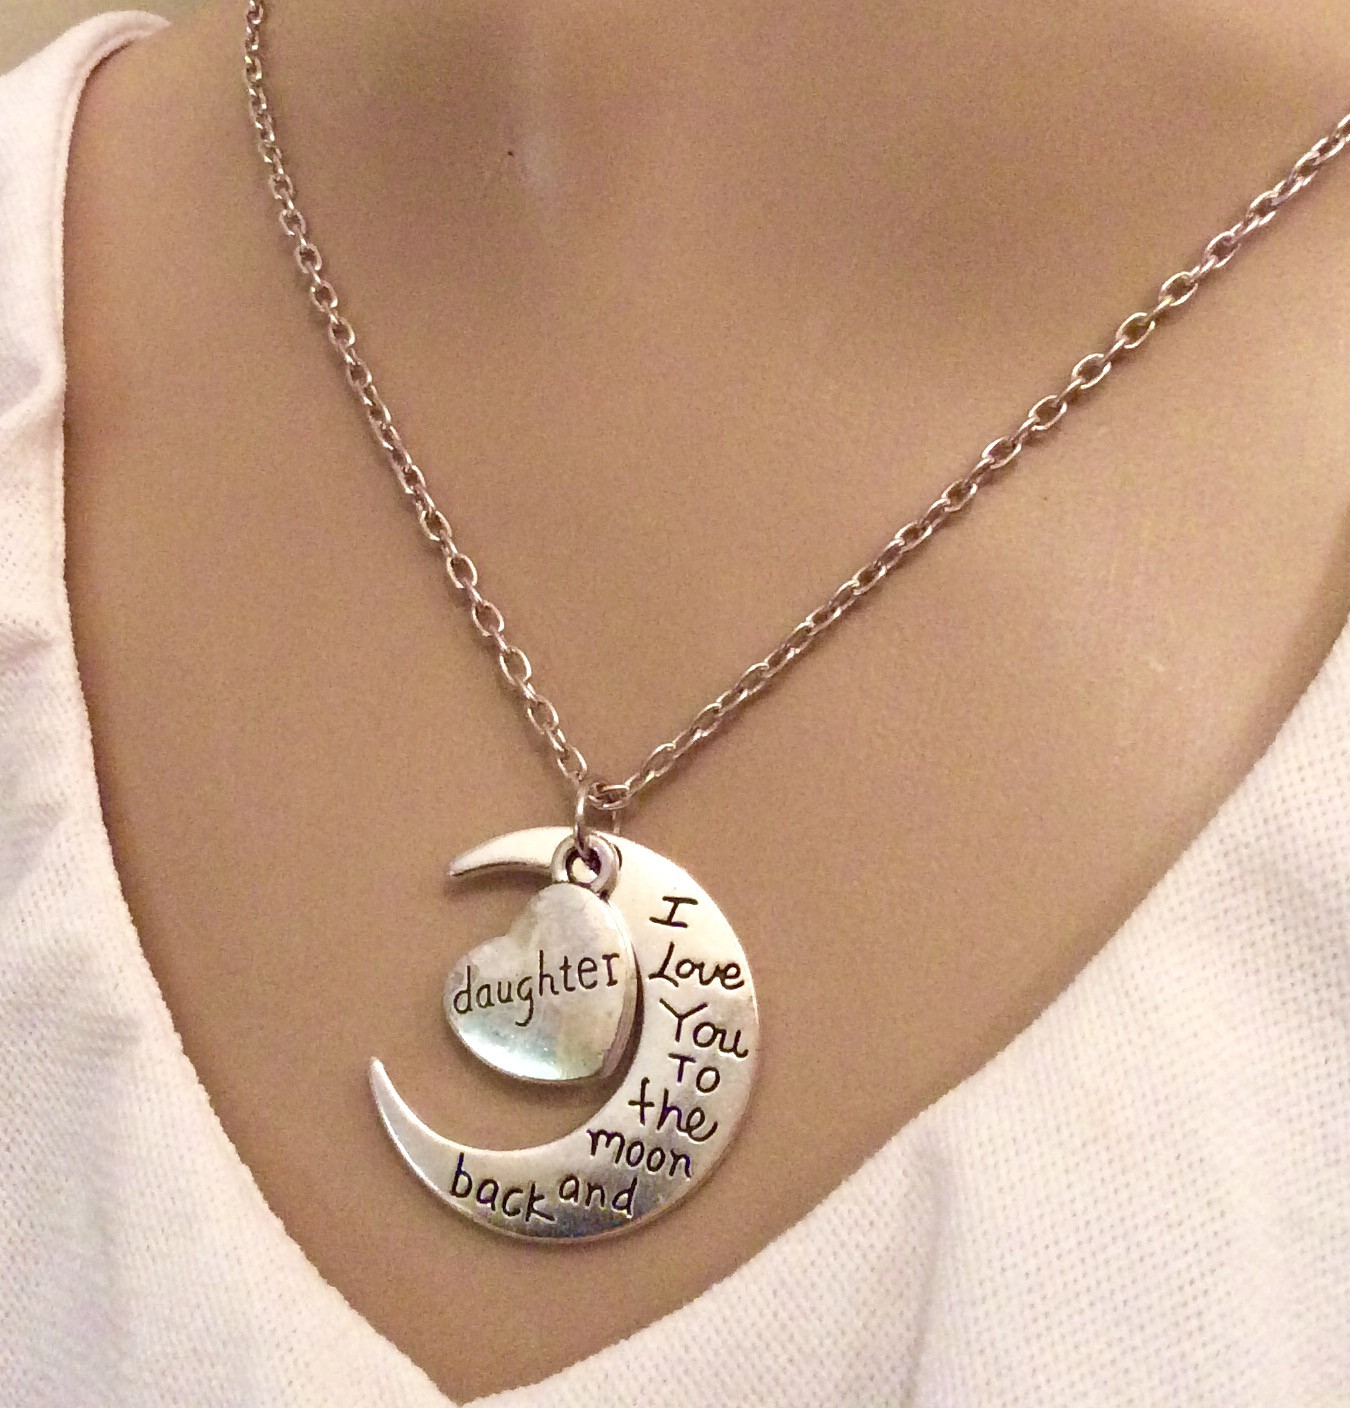 I Love You To The Moon And Back Necklaces
 Necklace – I Love You to the Moon and Back – Daughter